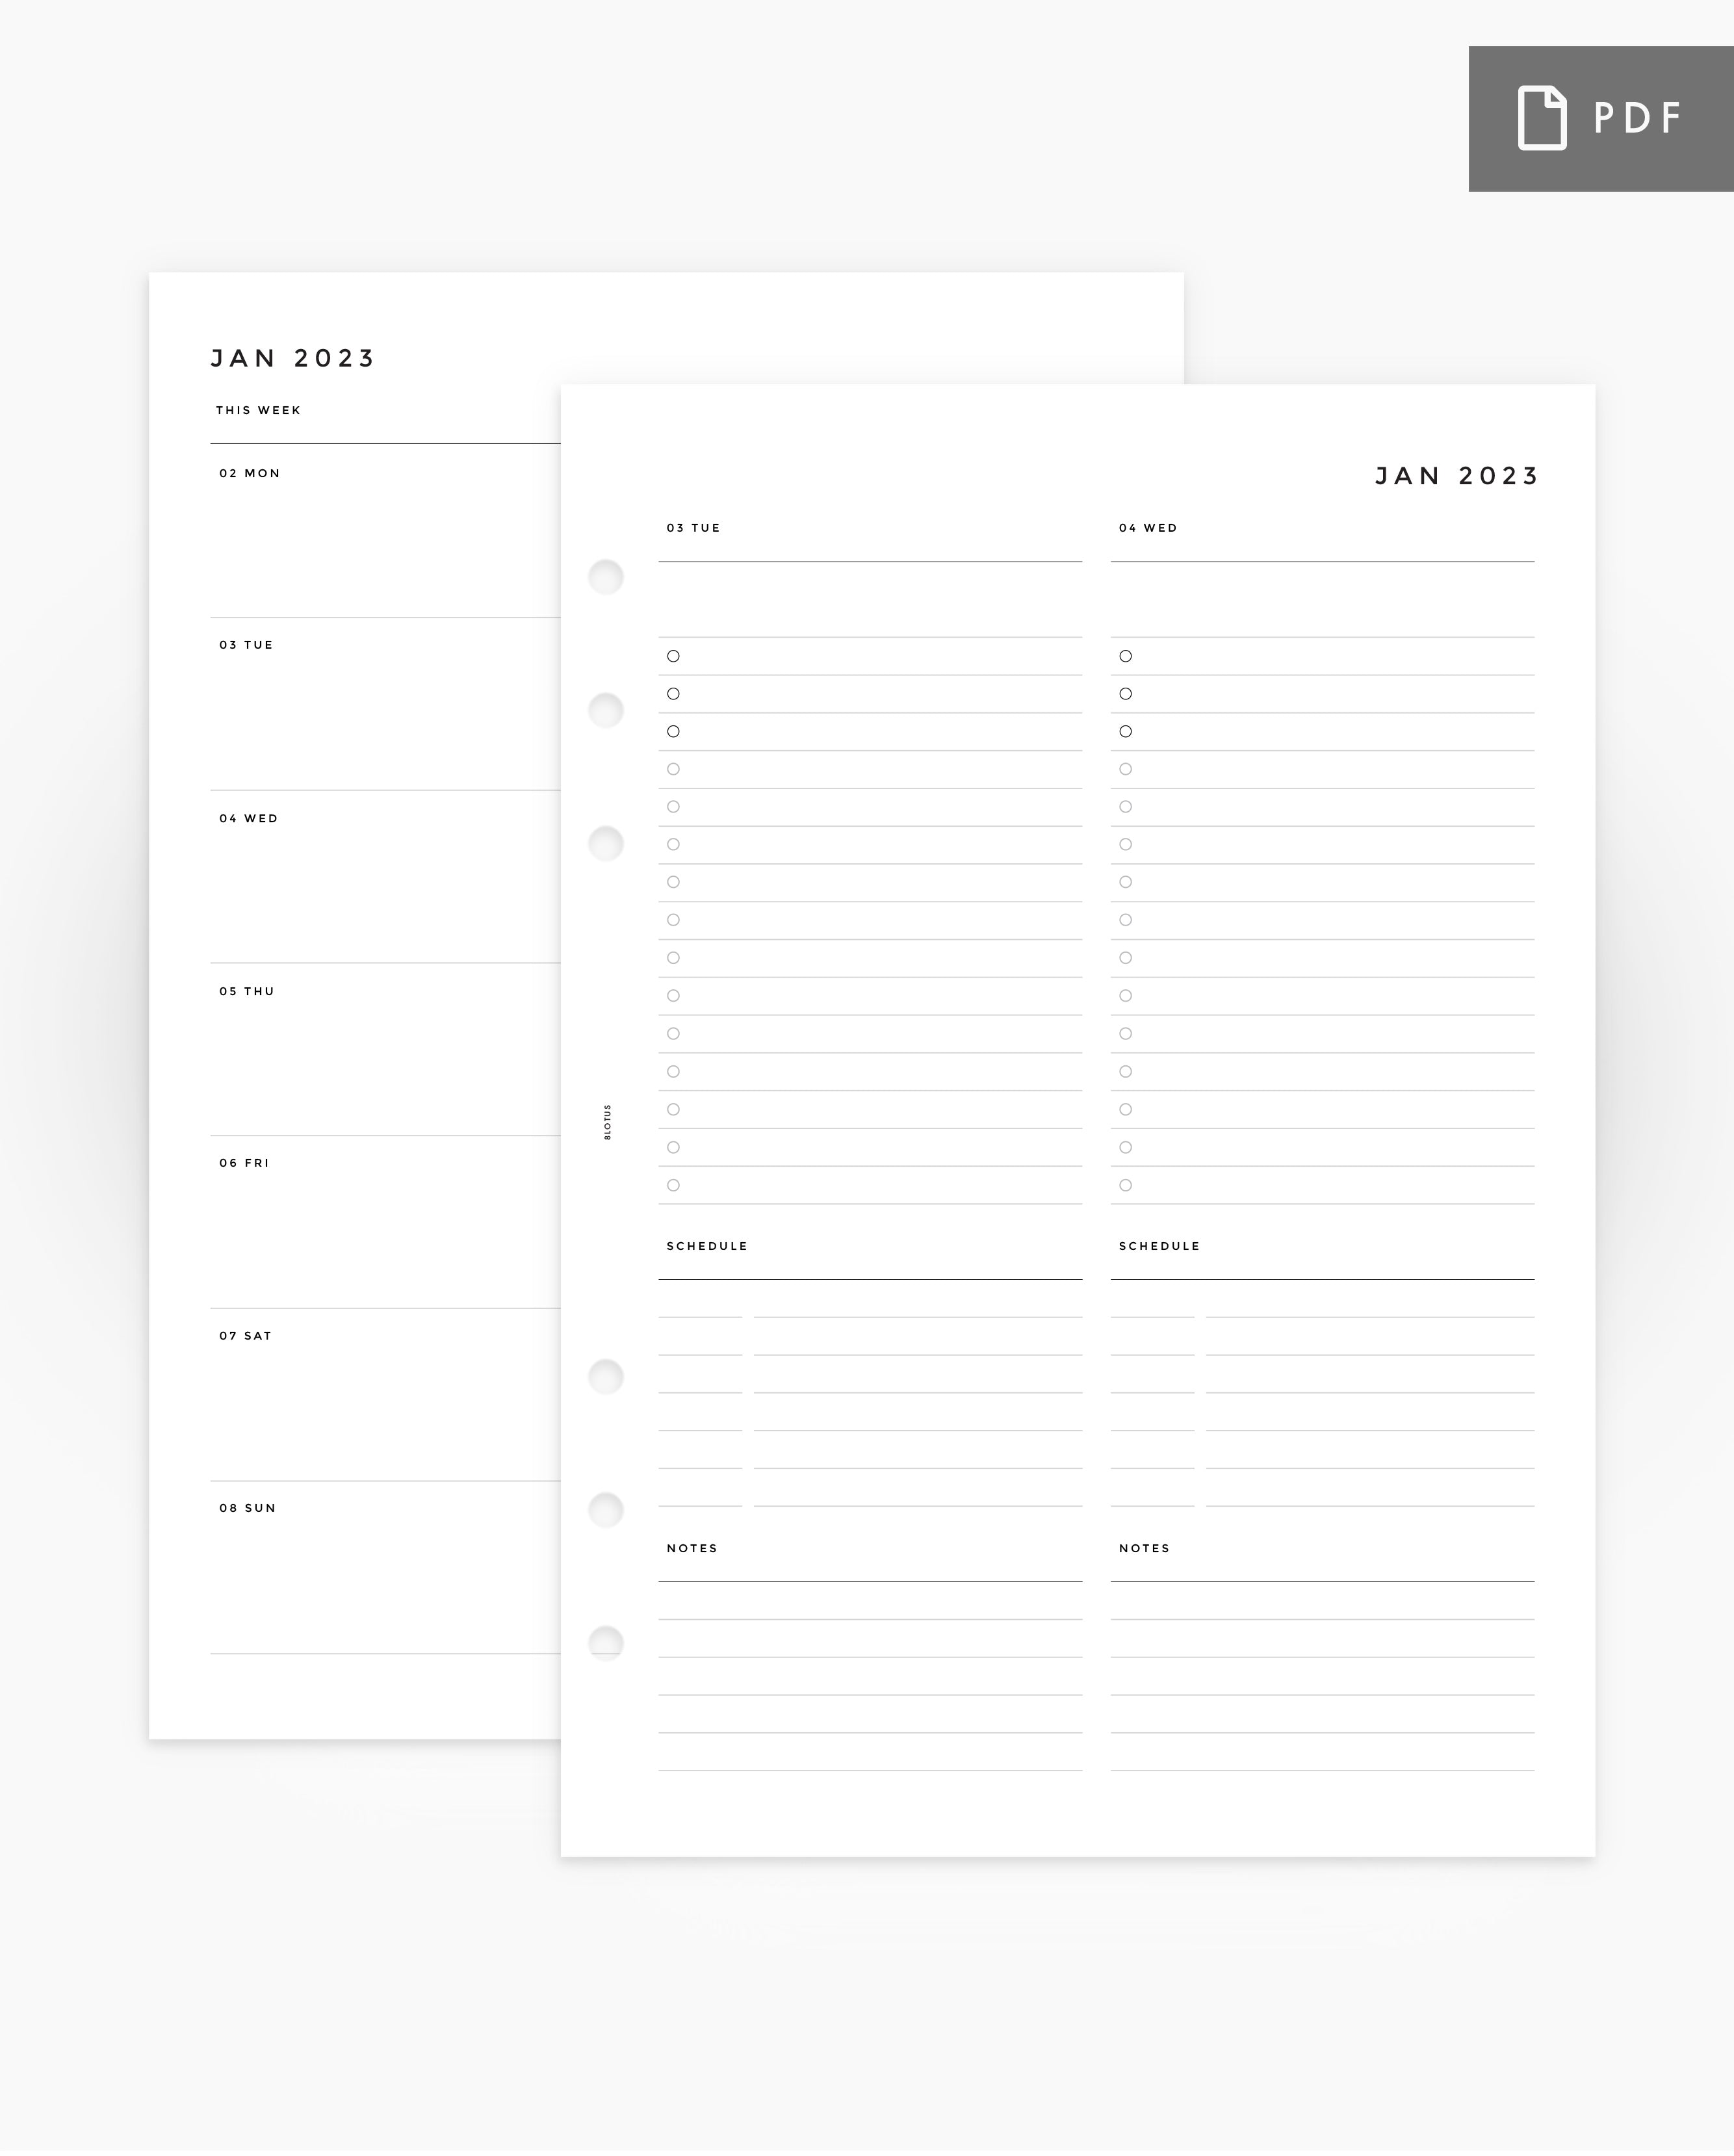 MN080A - 2023 DAILY PLANNER - 2DO1P - PDF